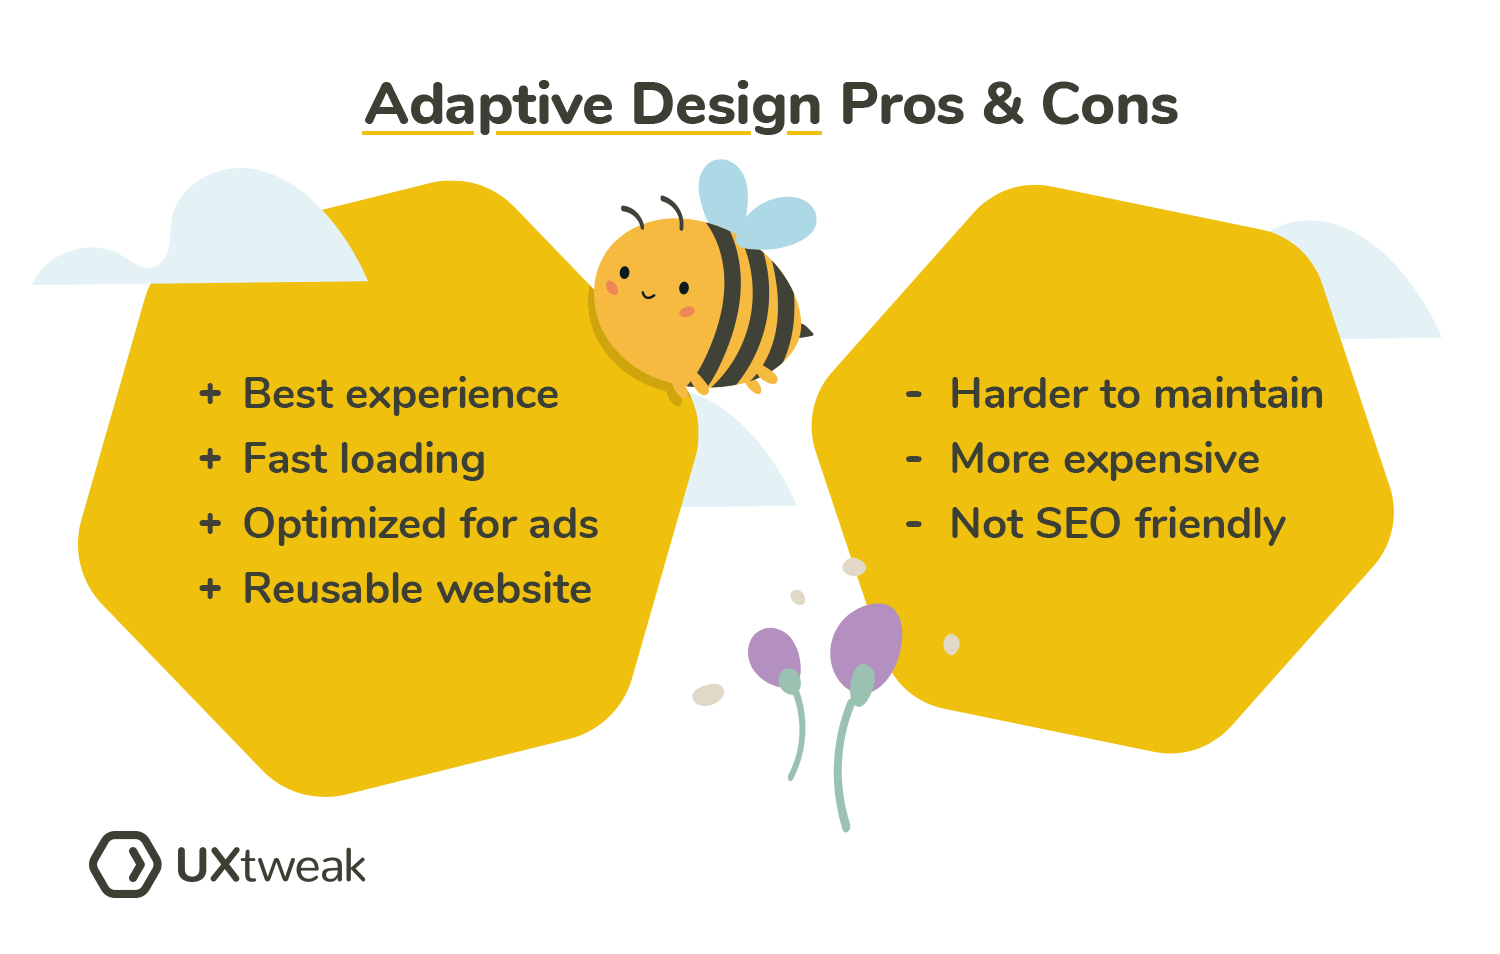 Adaptive design pros and cons